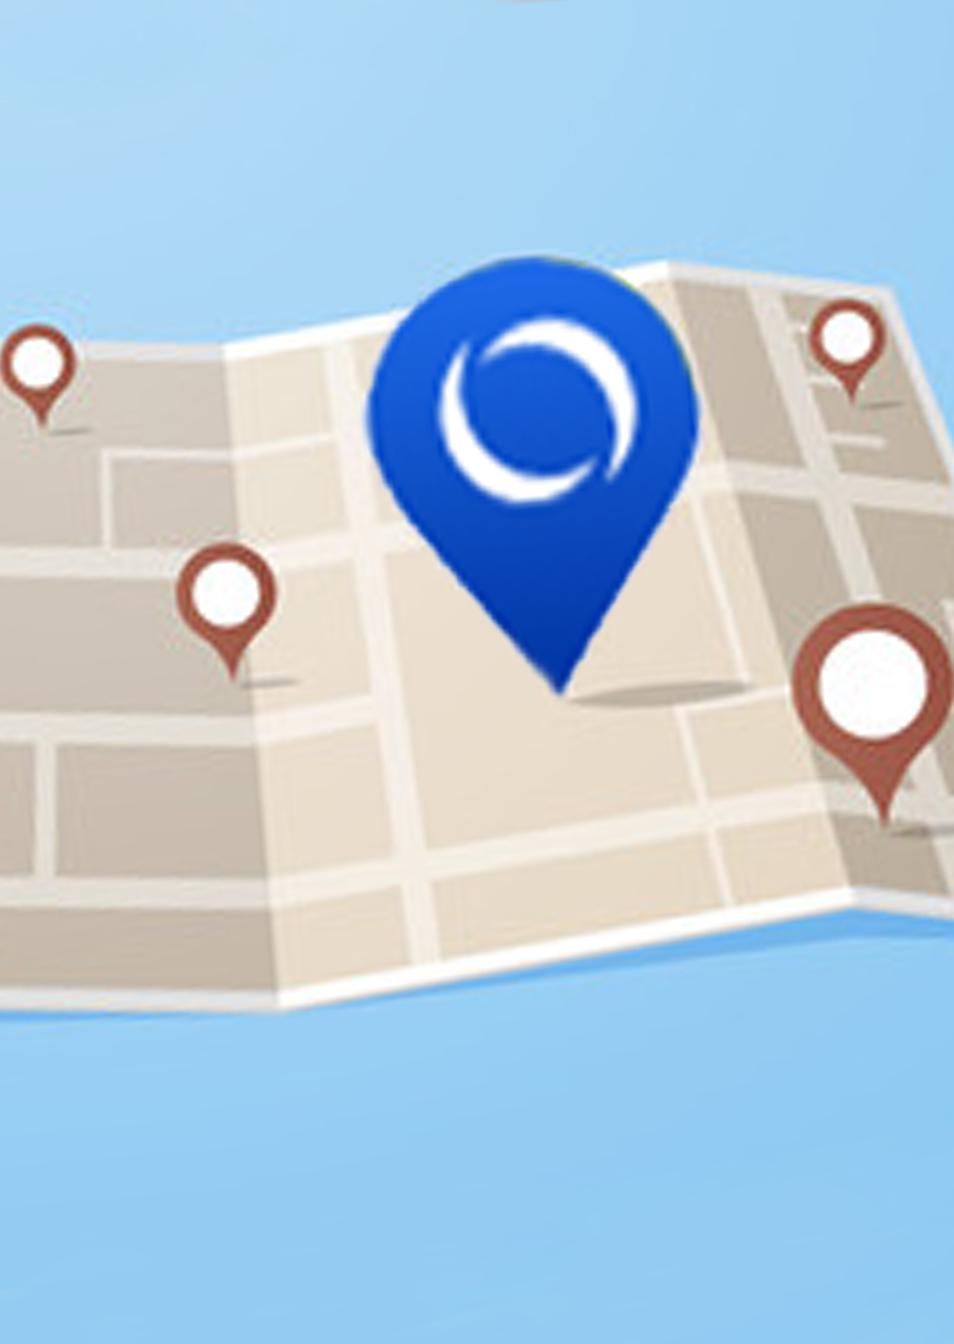 GGB's global supply chain allows you to find a GGB location near you